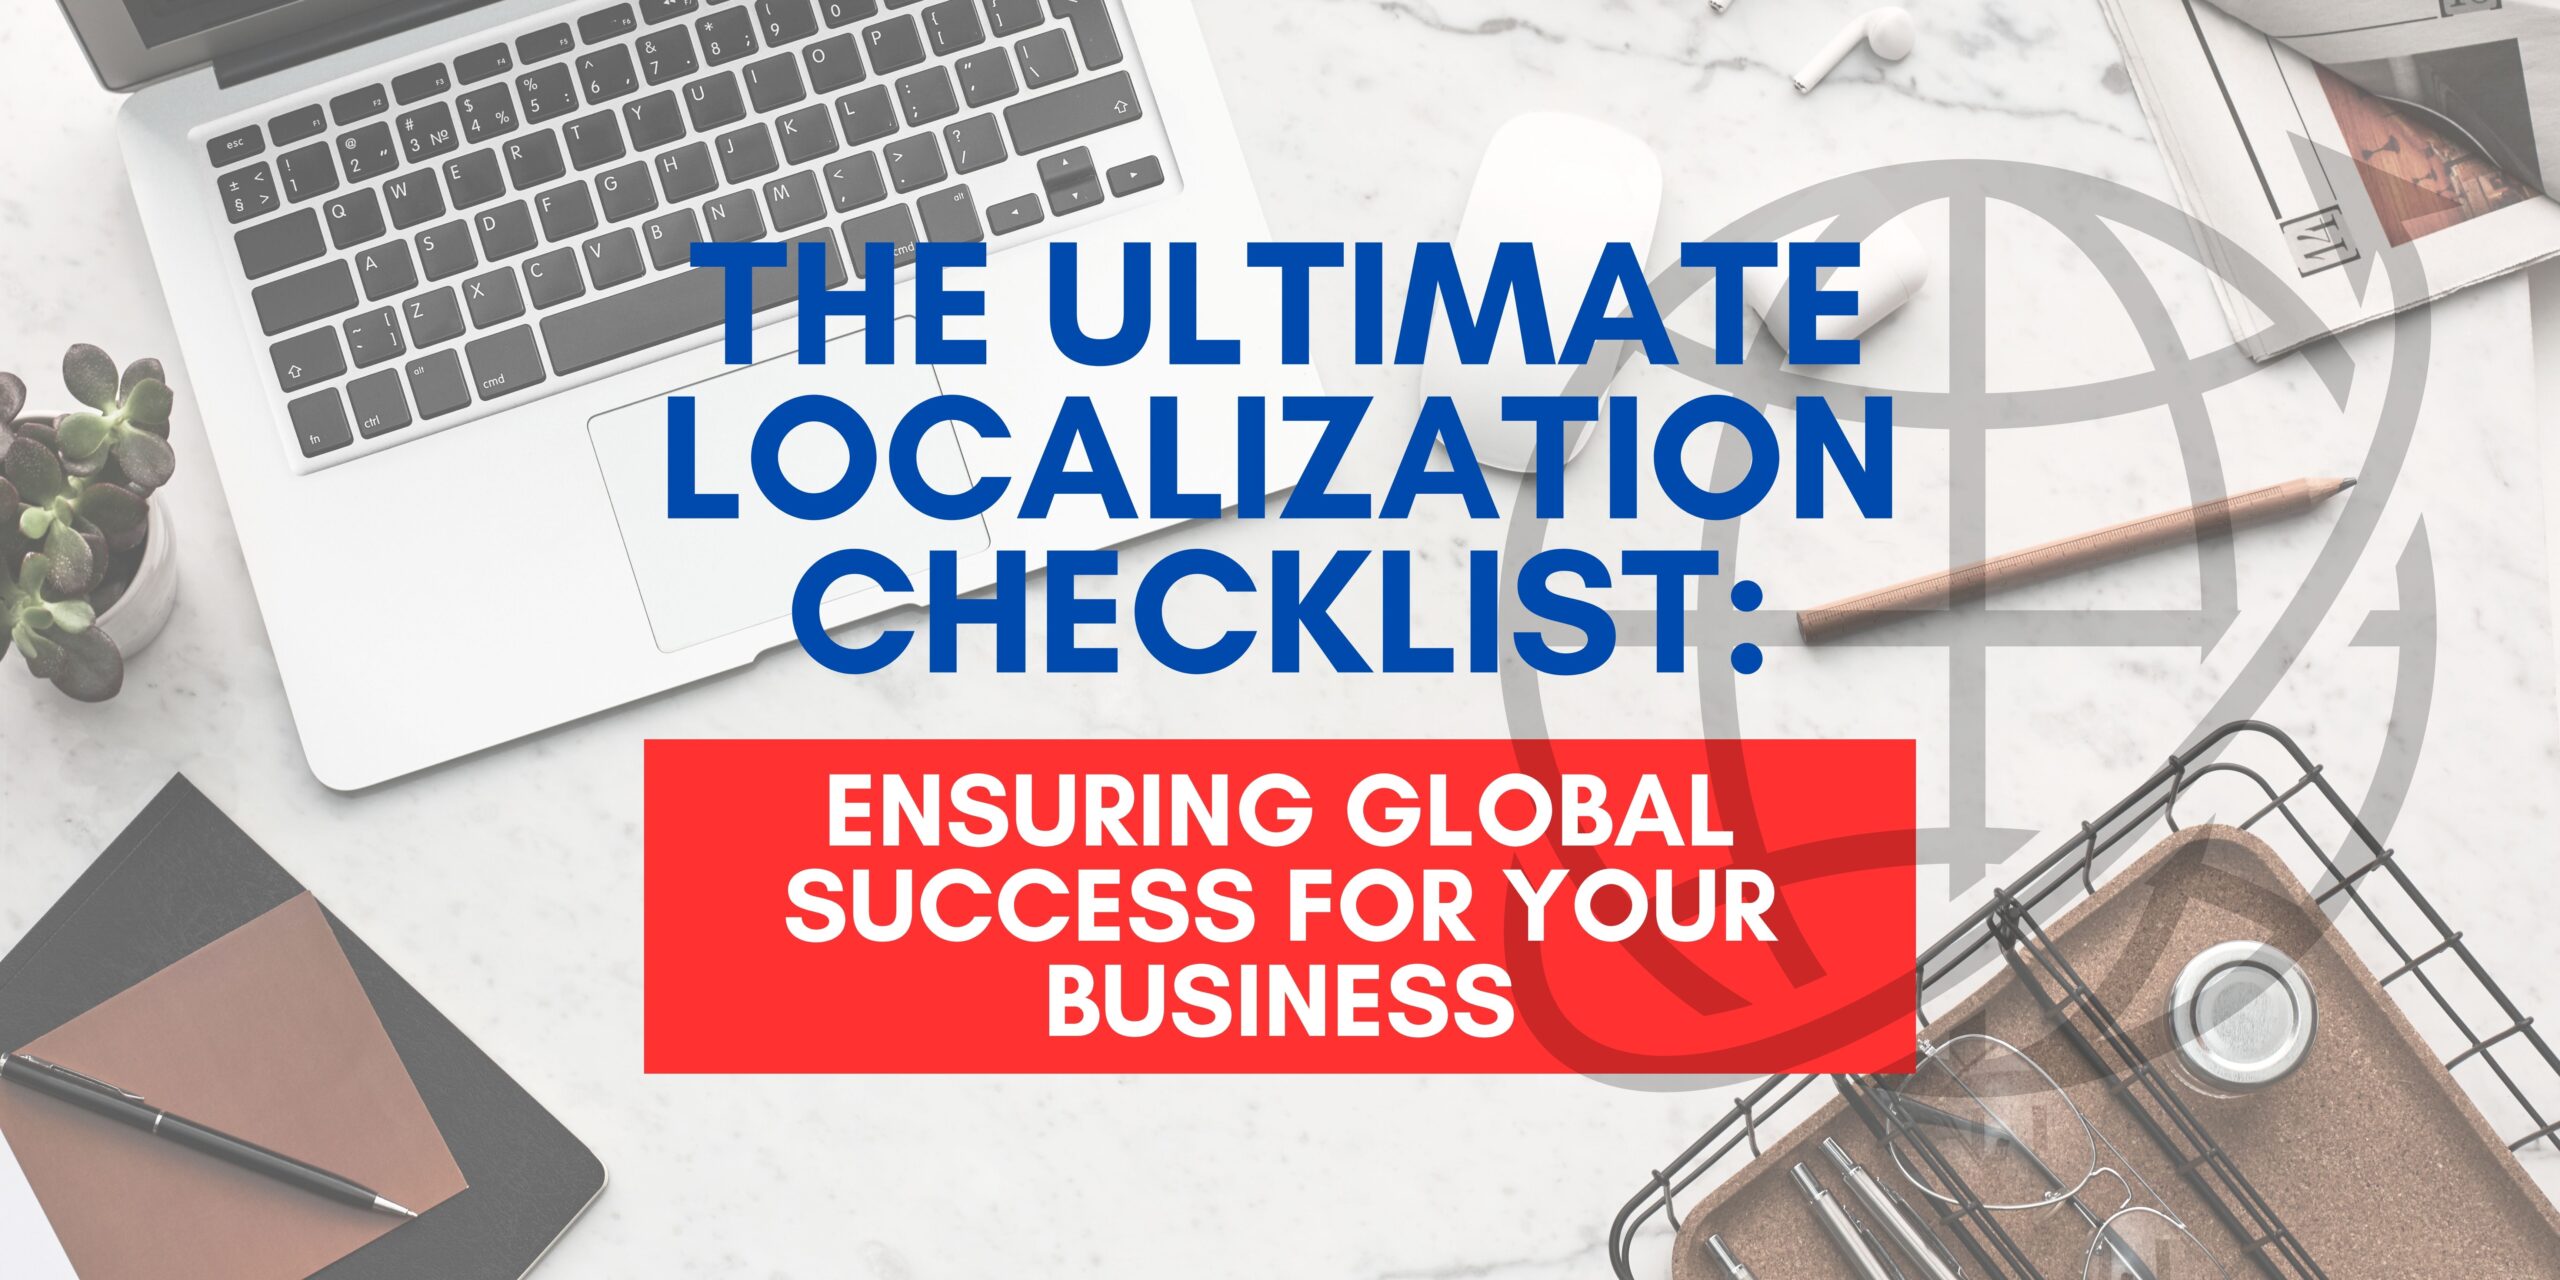 The Ultimate Localization Checklist: Ensuring Global Success for Your Business